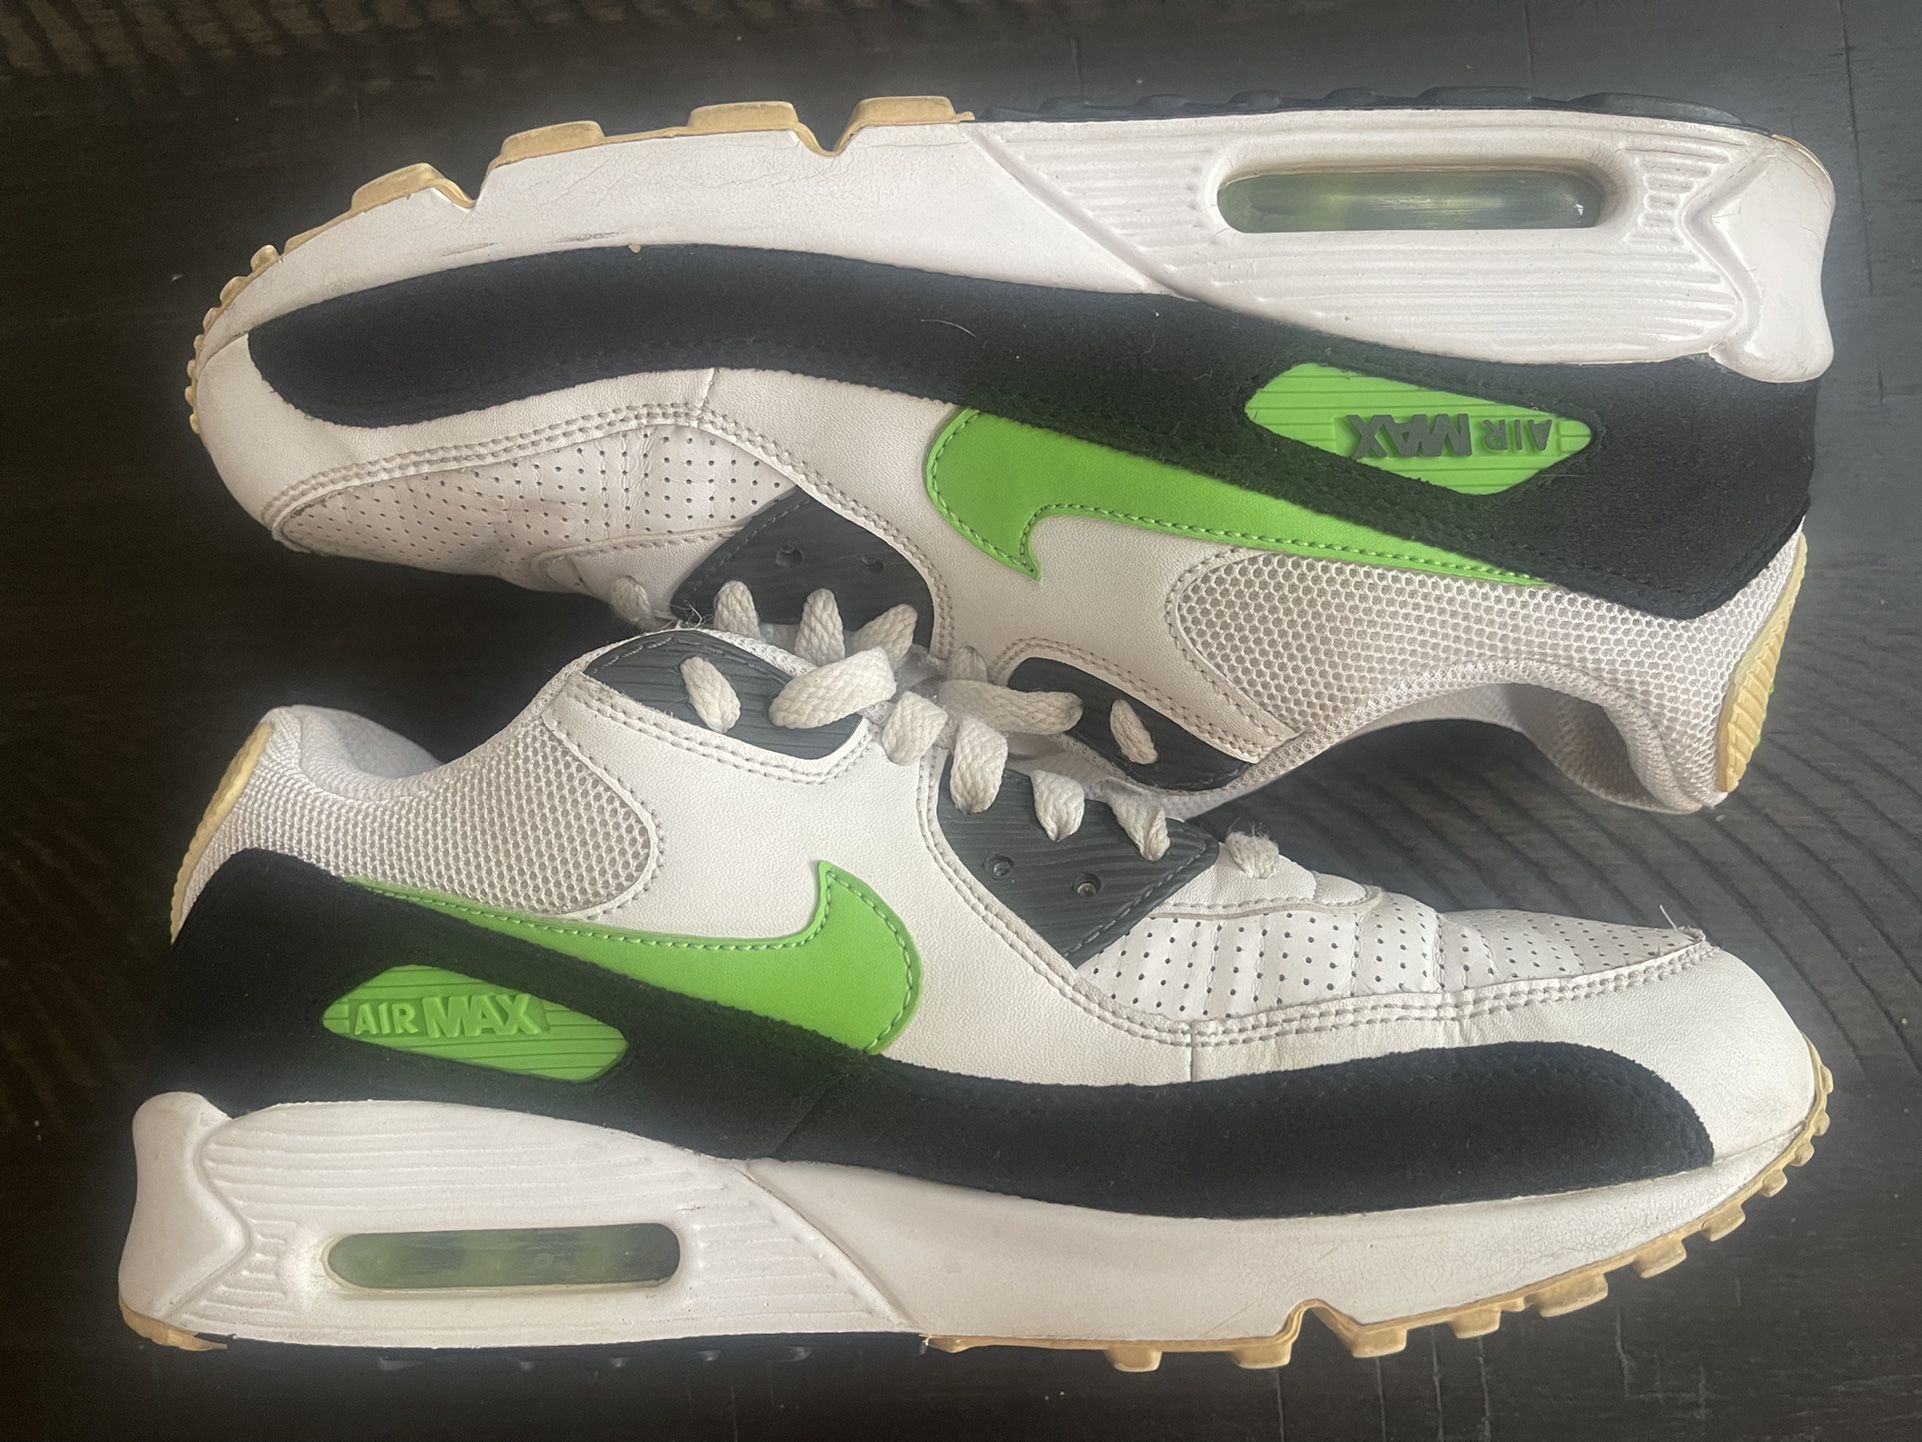 Nike Max 90 MEAN Size 9.5 for Sale in Maricopa, AZ - OfferUp